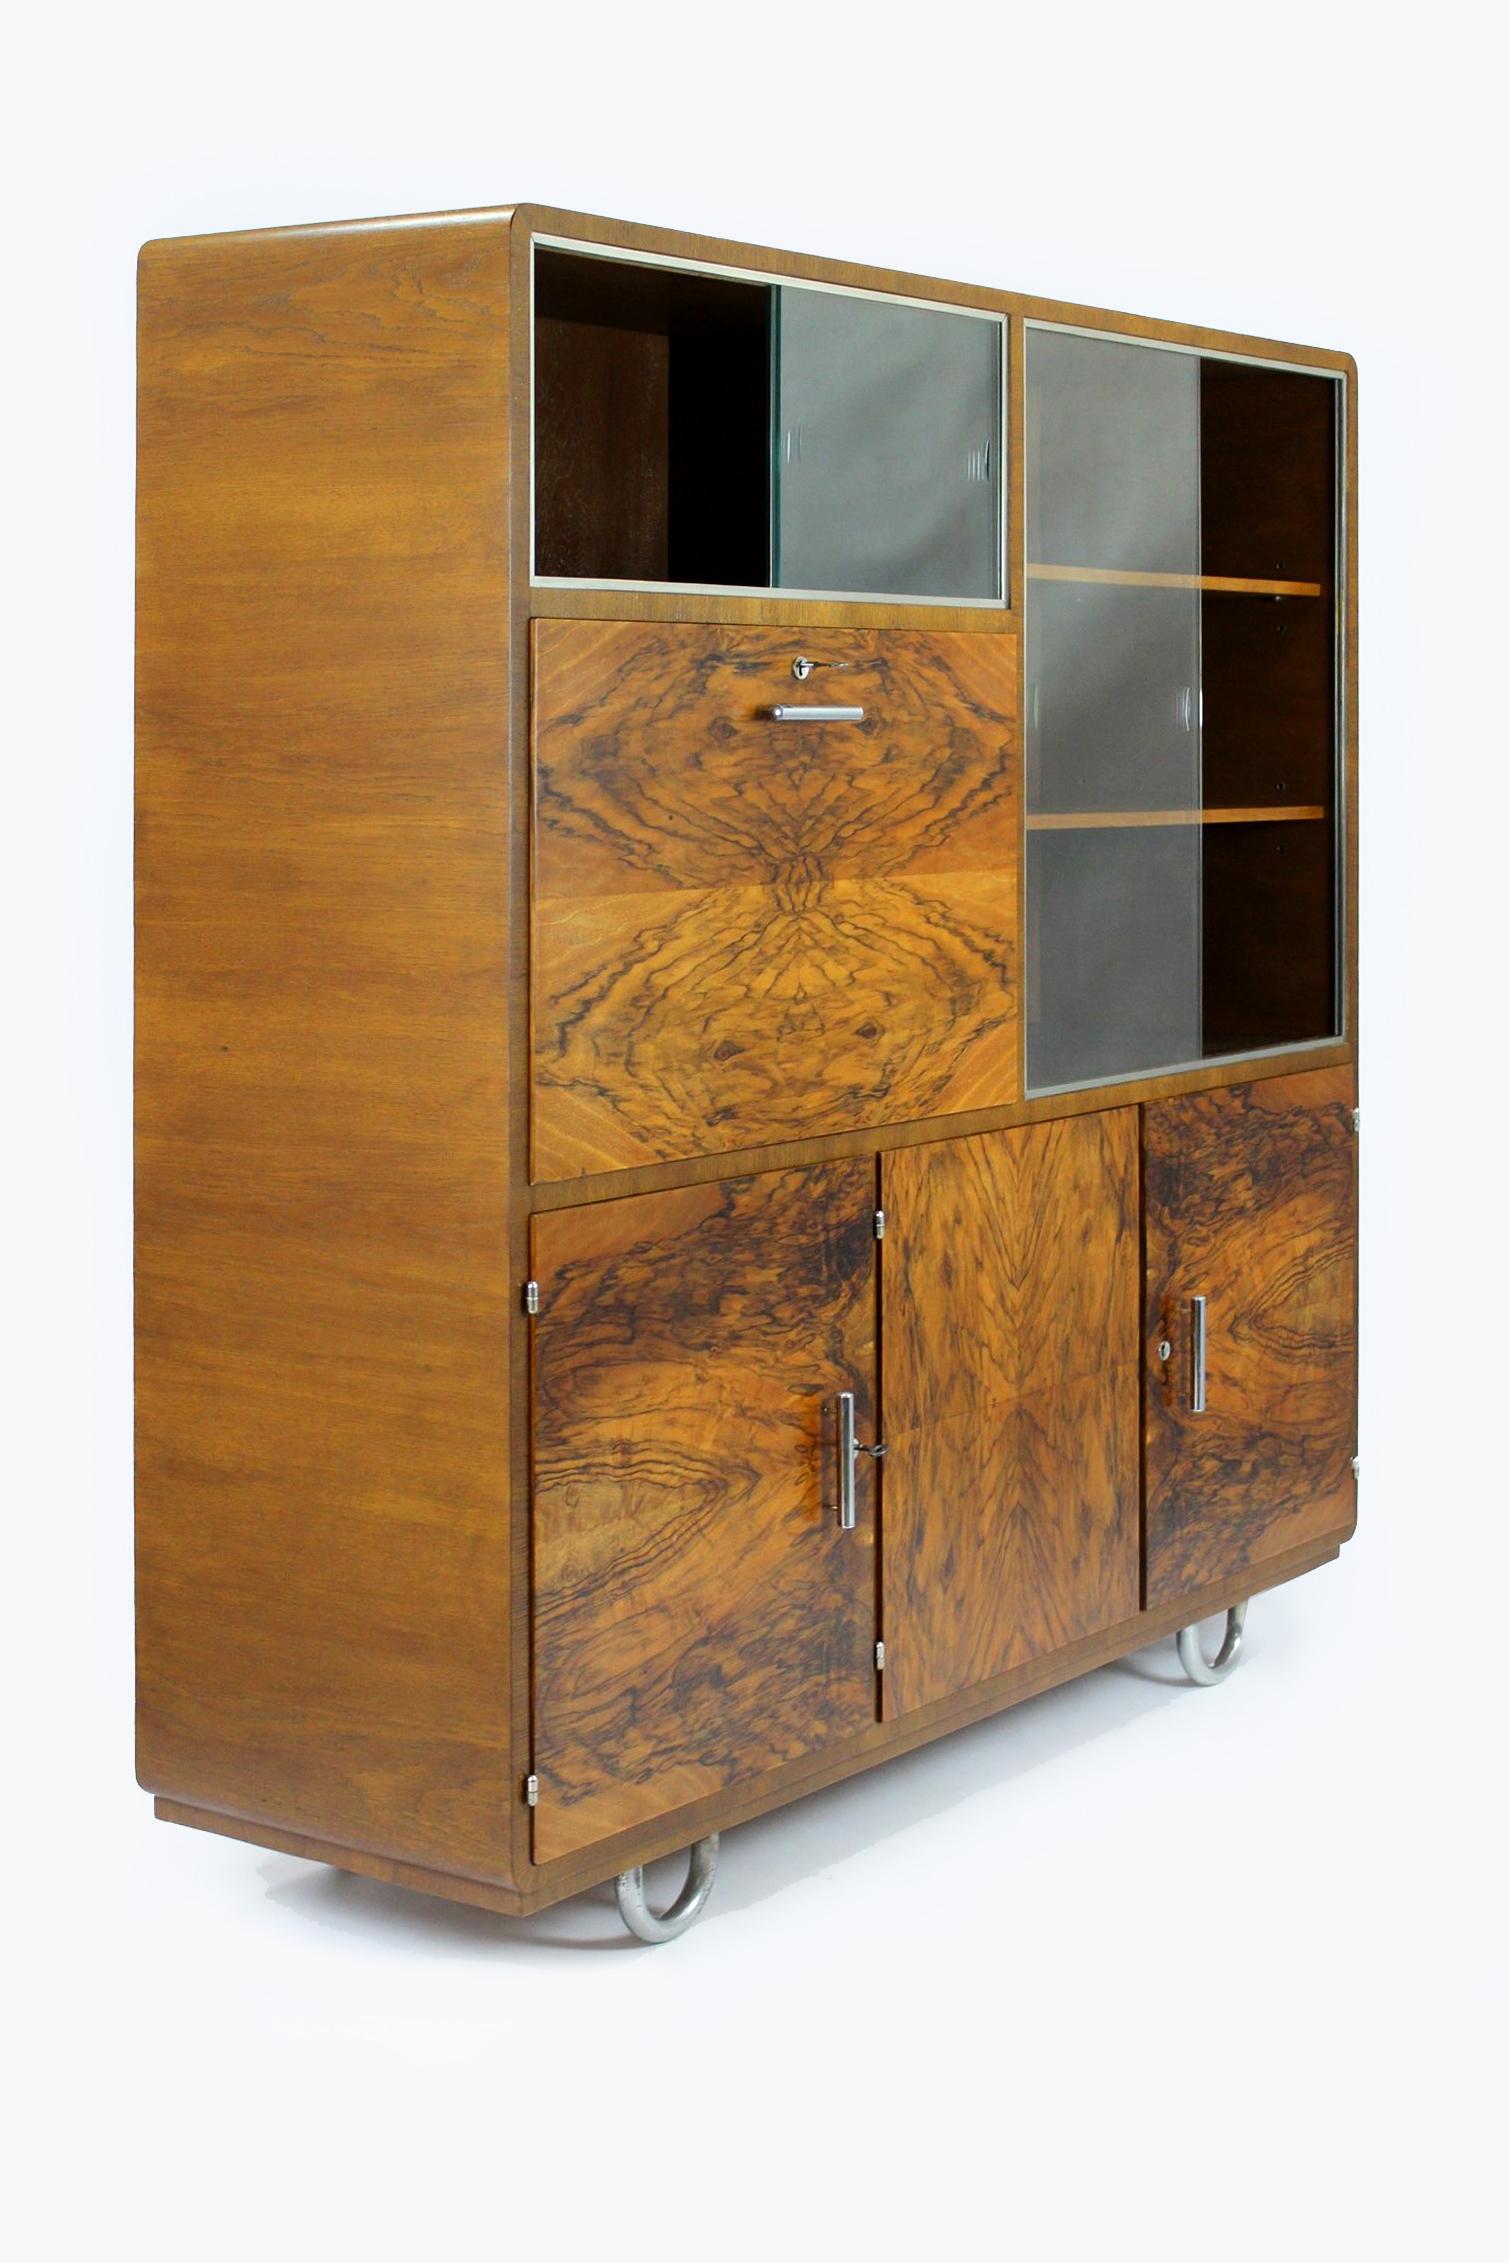 
This Bauhaus style cupboard in oak and walnut, was produced in the 1930s by Robert Slezak. The cabinet is multifunctional, divided into 5 parts. There are 4 drawers, 3 shelves, 2 display parts with sliding glass (the glass is original) and a